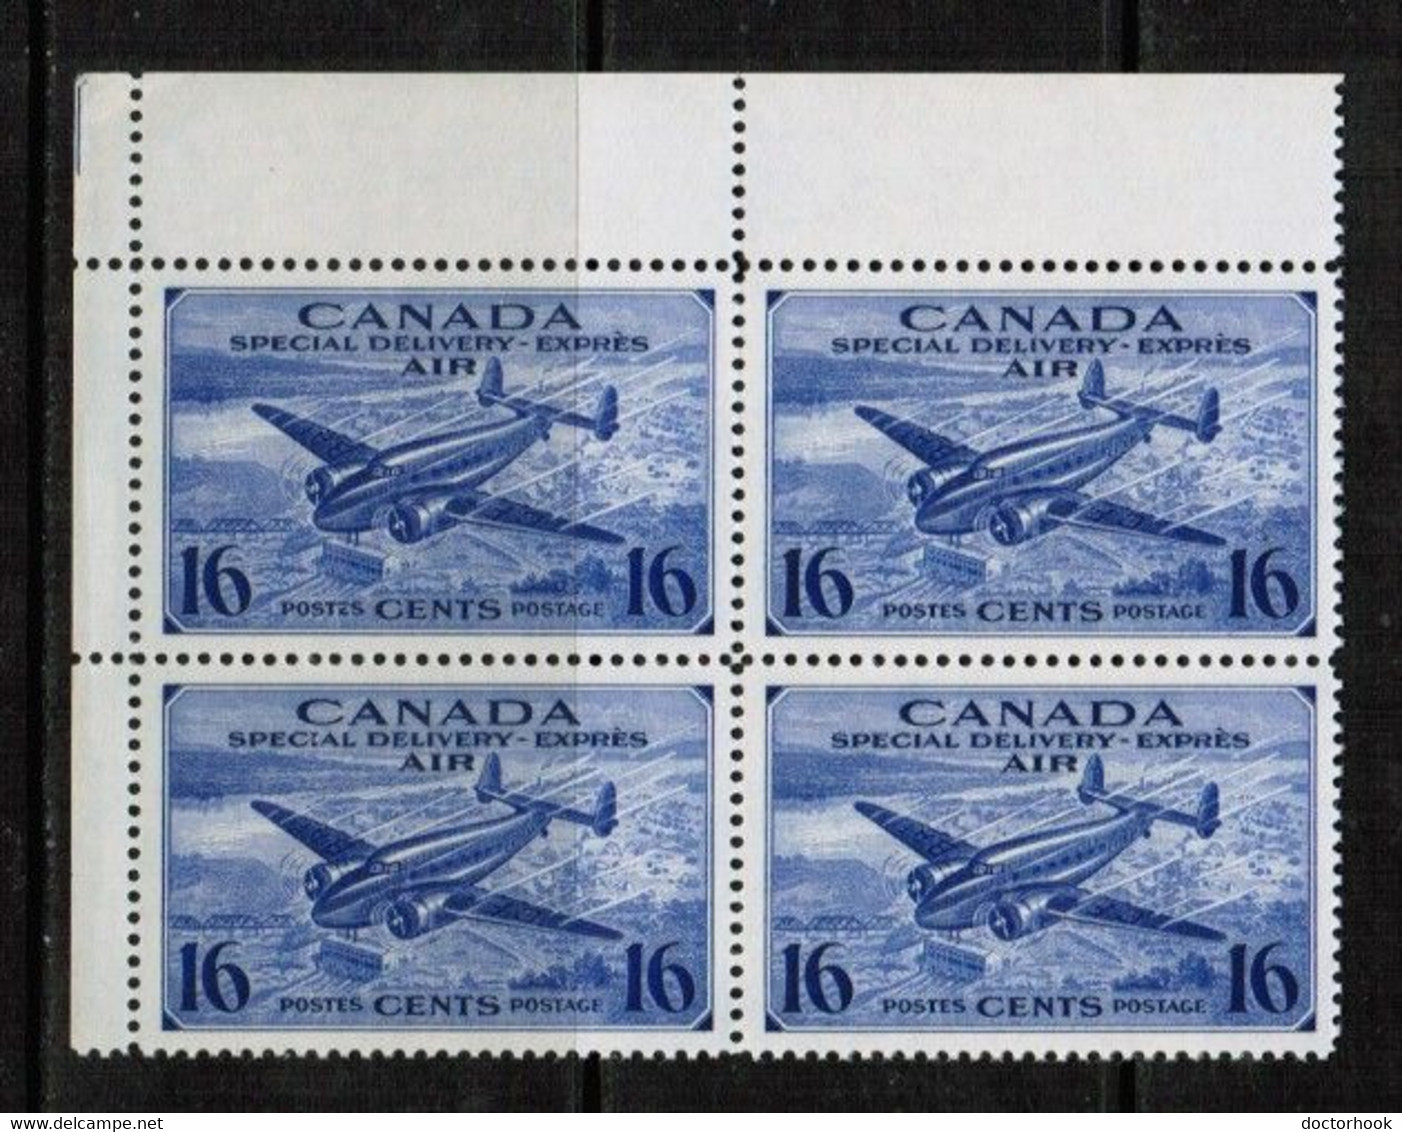 CANADA  Scott # CE 1** VF MINT NH CORNER BLOCK Of 4 (LG-1361) - Airmail: Special Delivery